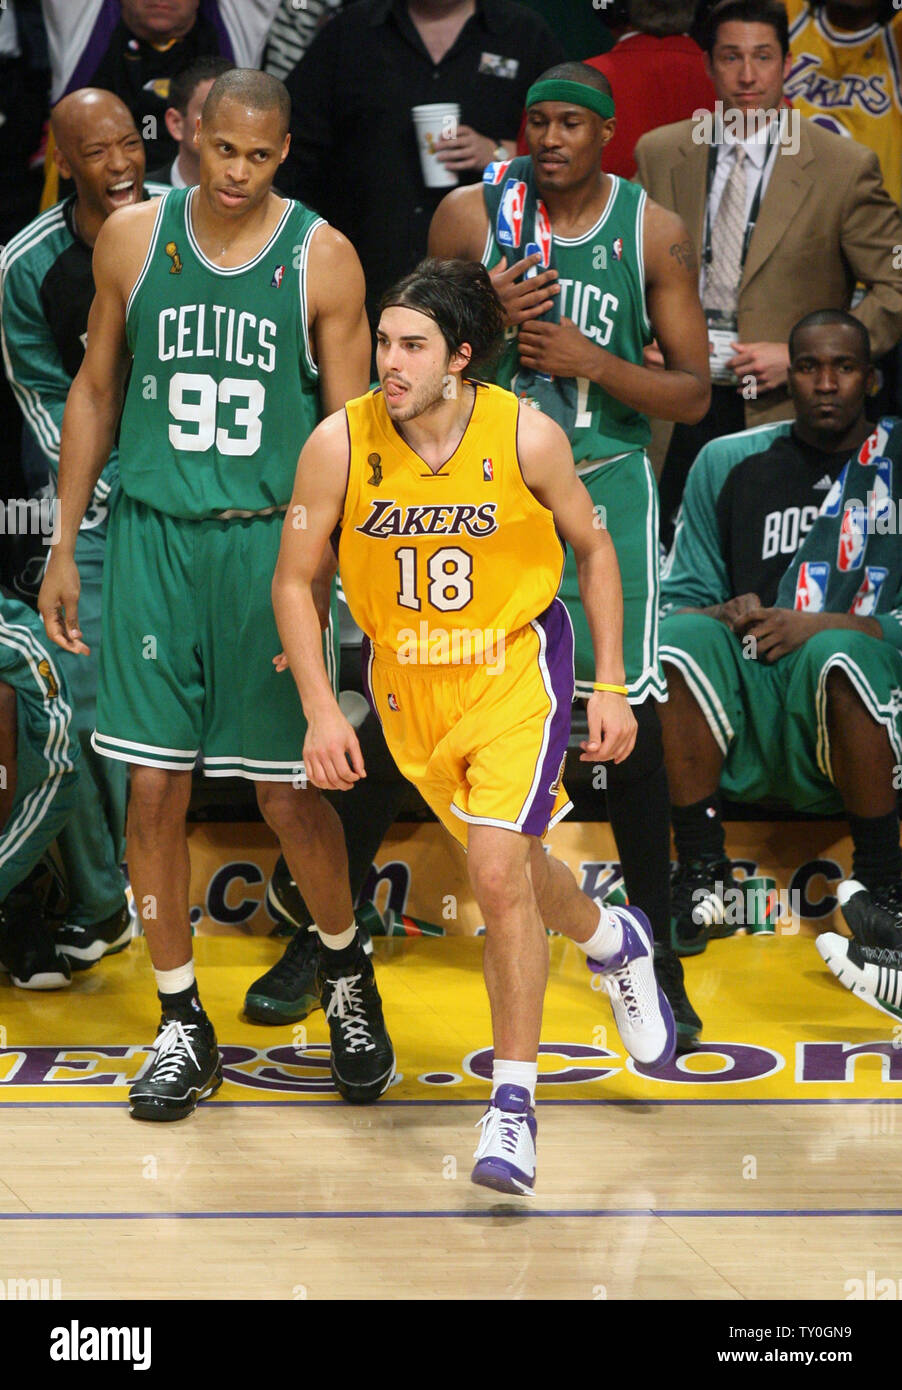 Los Angeles Lakers' Sasha Vujacic (18) celebrates his three-pointer late in the second half as Boston Celtics P.J. Brown (93) looks on in Game 3 of the NBA finals at Staples Center in Los Angeles on June 10, 2008. The Lakers defeated the Celtics 87-81 to stave off a 3-0 hole in the best-of-seven series. The Celtics lead the series 2-1.  (UPI Photo/Lazlo Fitz) Stock Photo